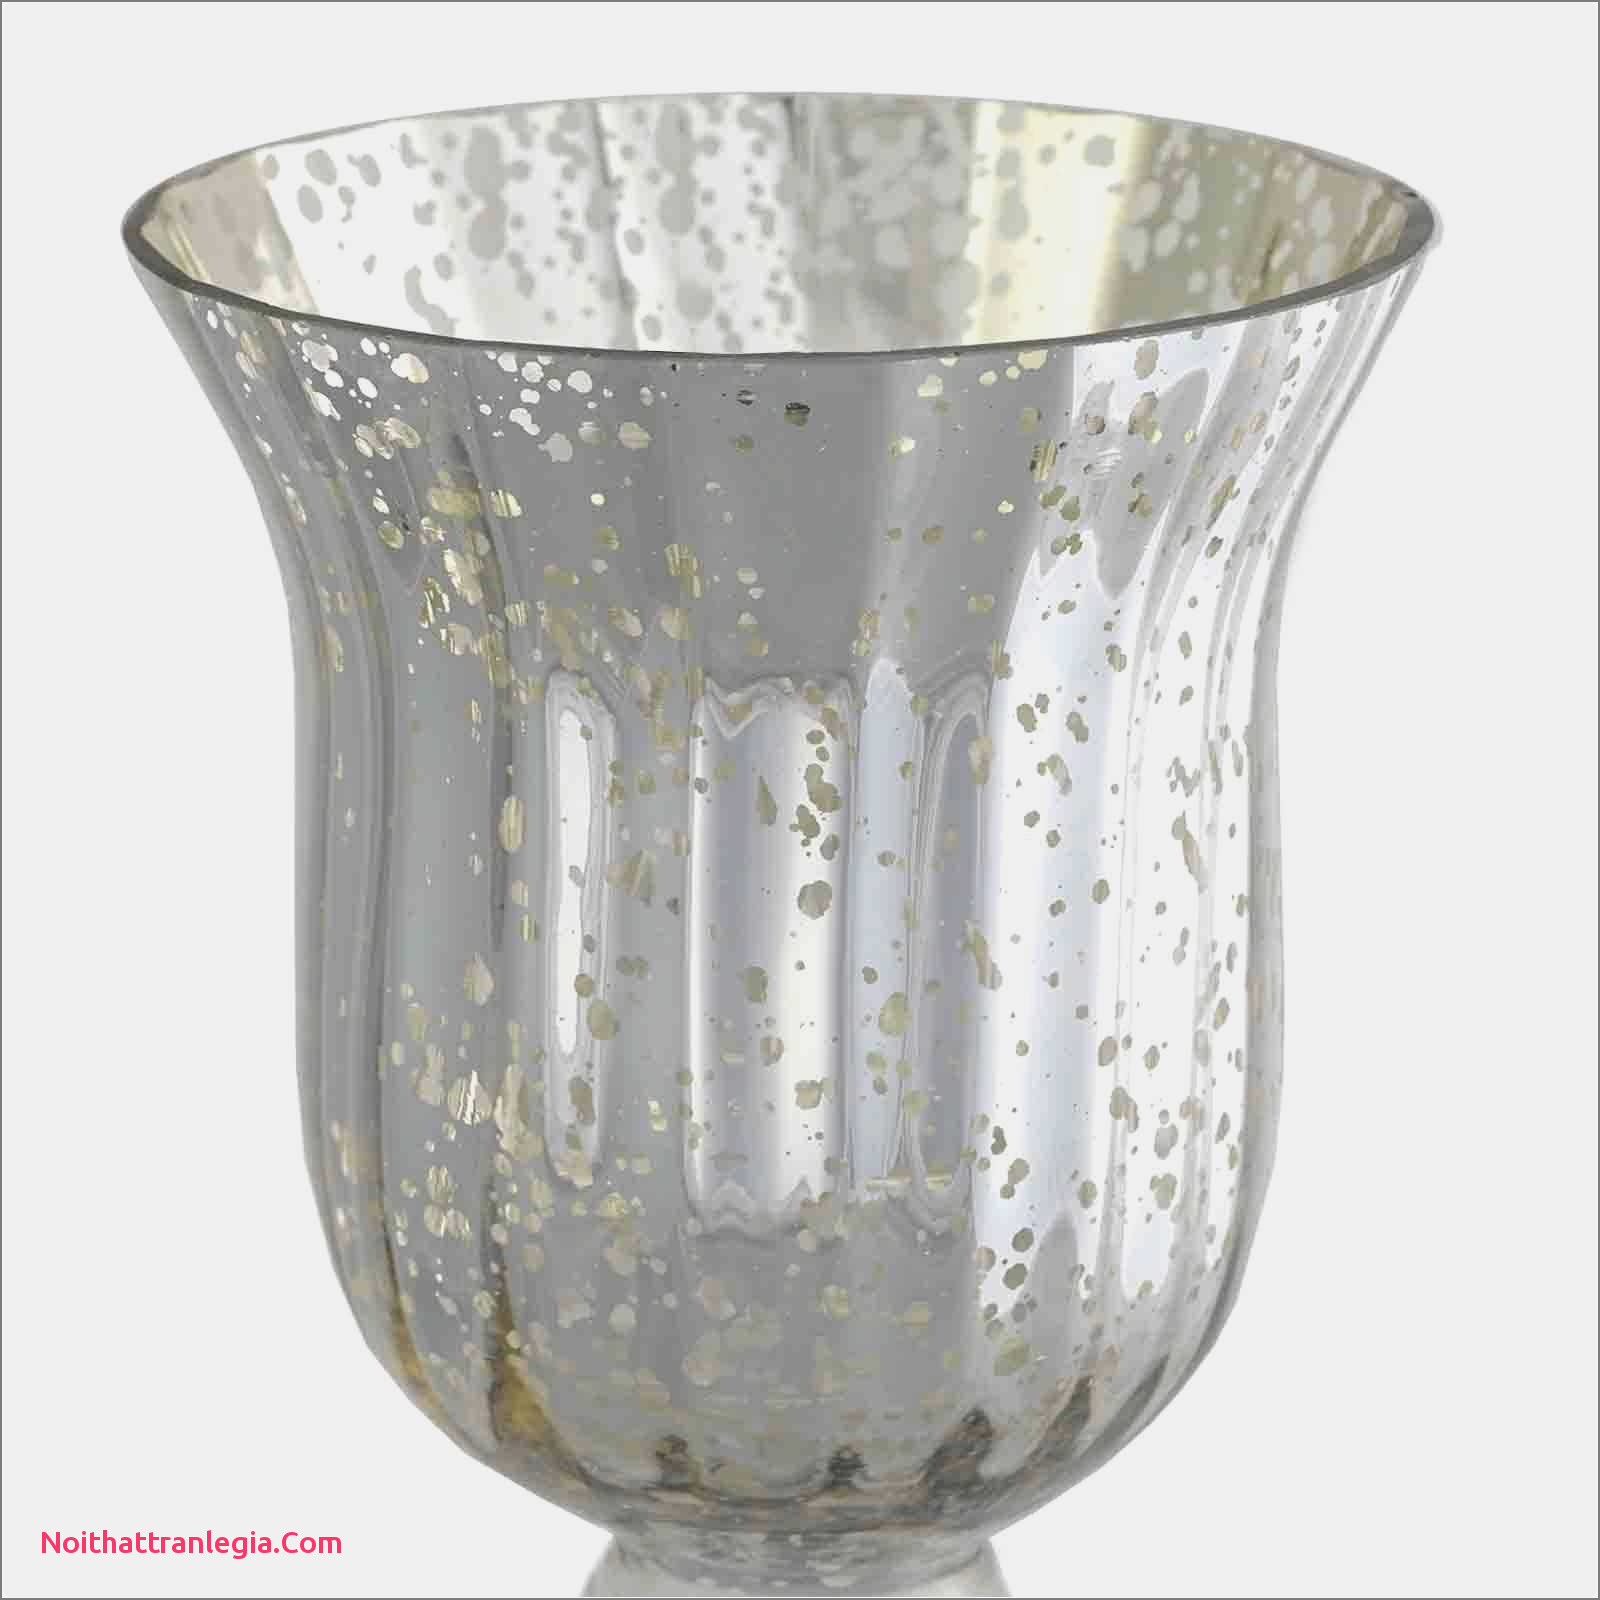 24 attractive Beautiful Vases for Sale 2024 free download beautiful vases for sale of 20 wedding vases noithattranlegia vases design with regard to wedding guest gift ideas inspirational candles for wedding favors superb pe s5h vases candle vase i